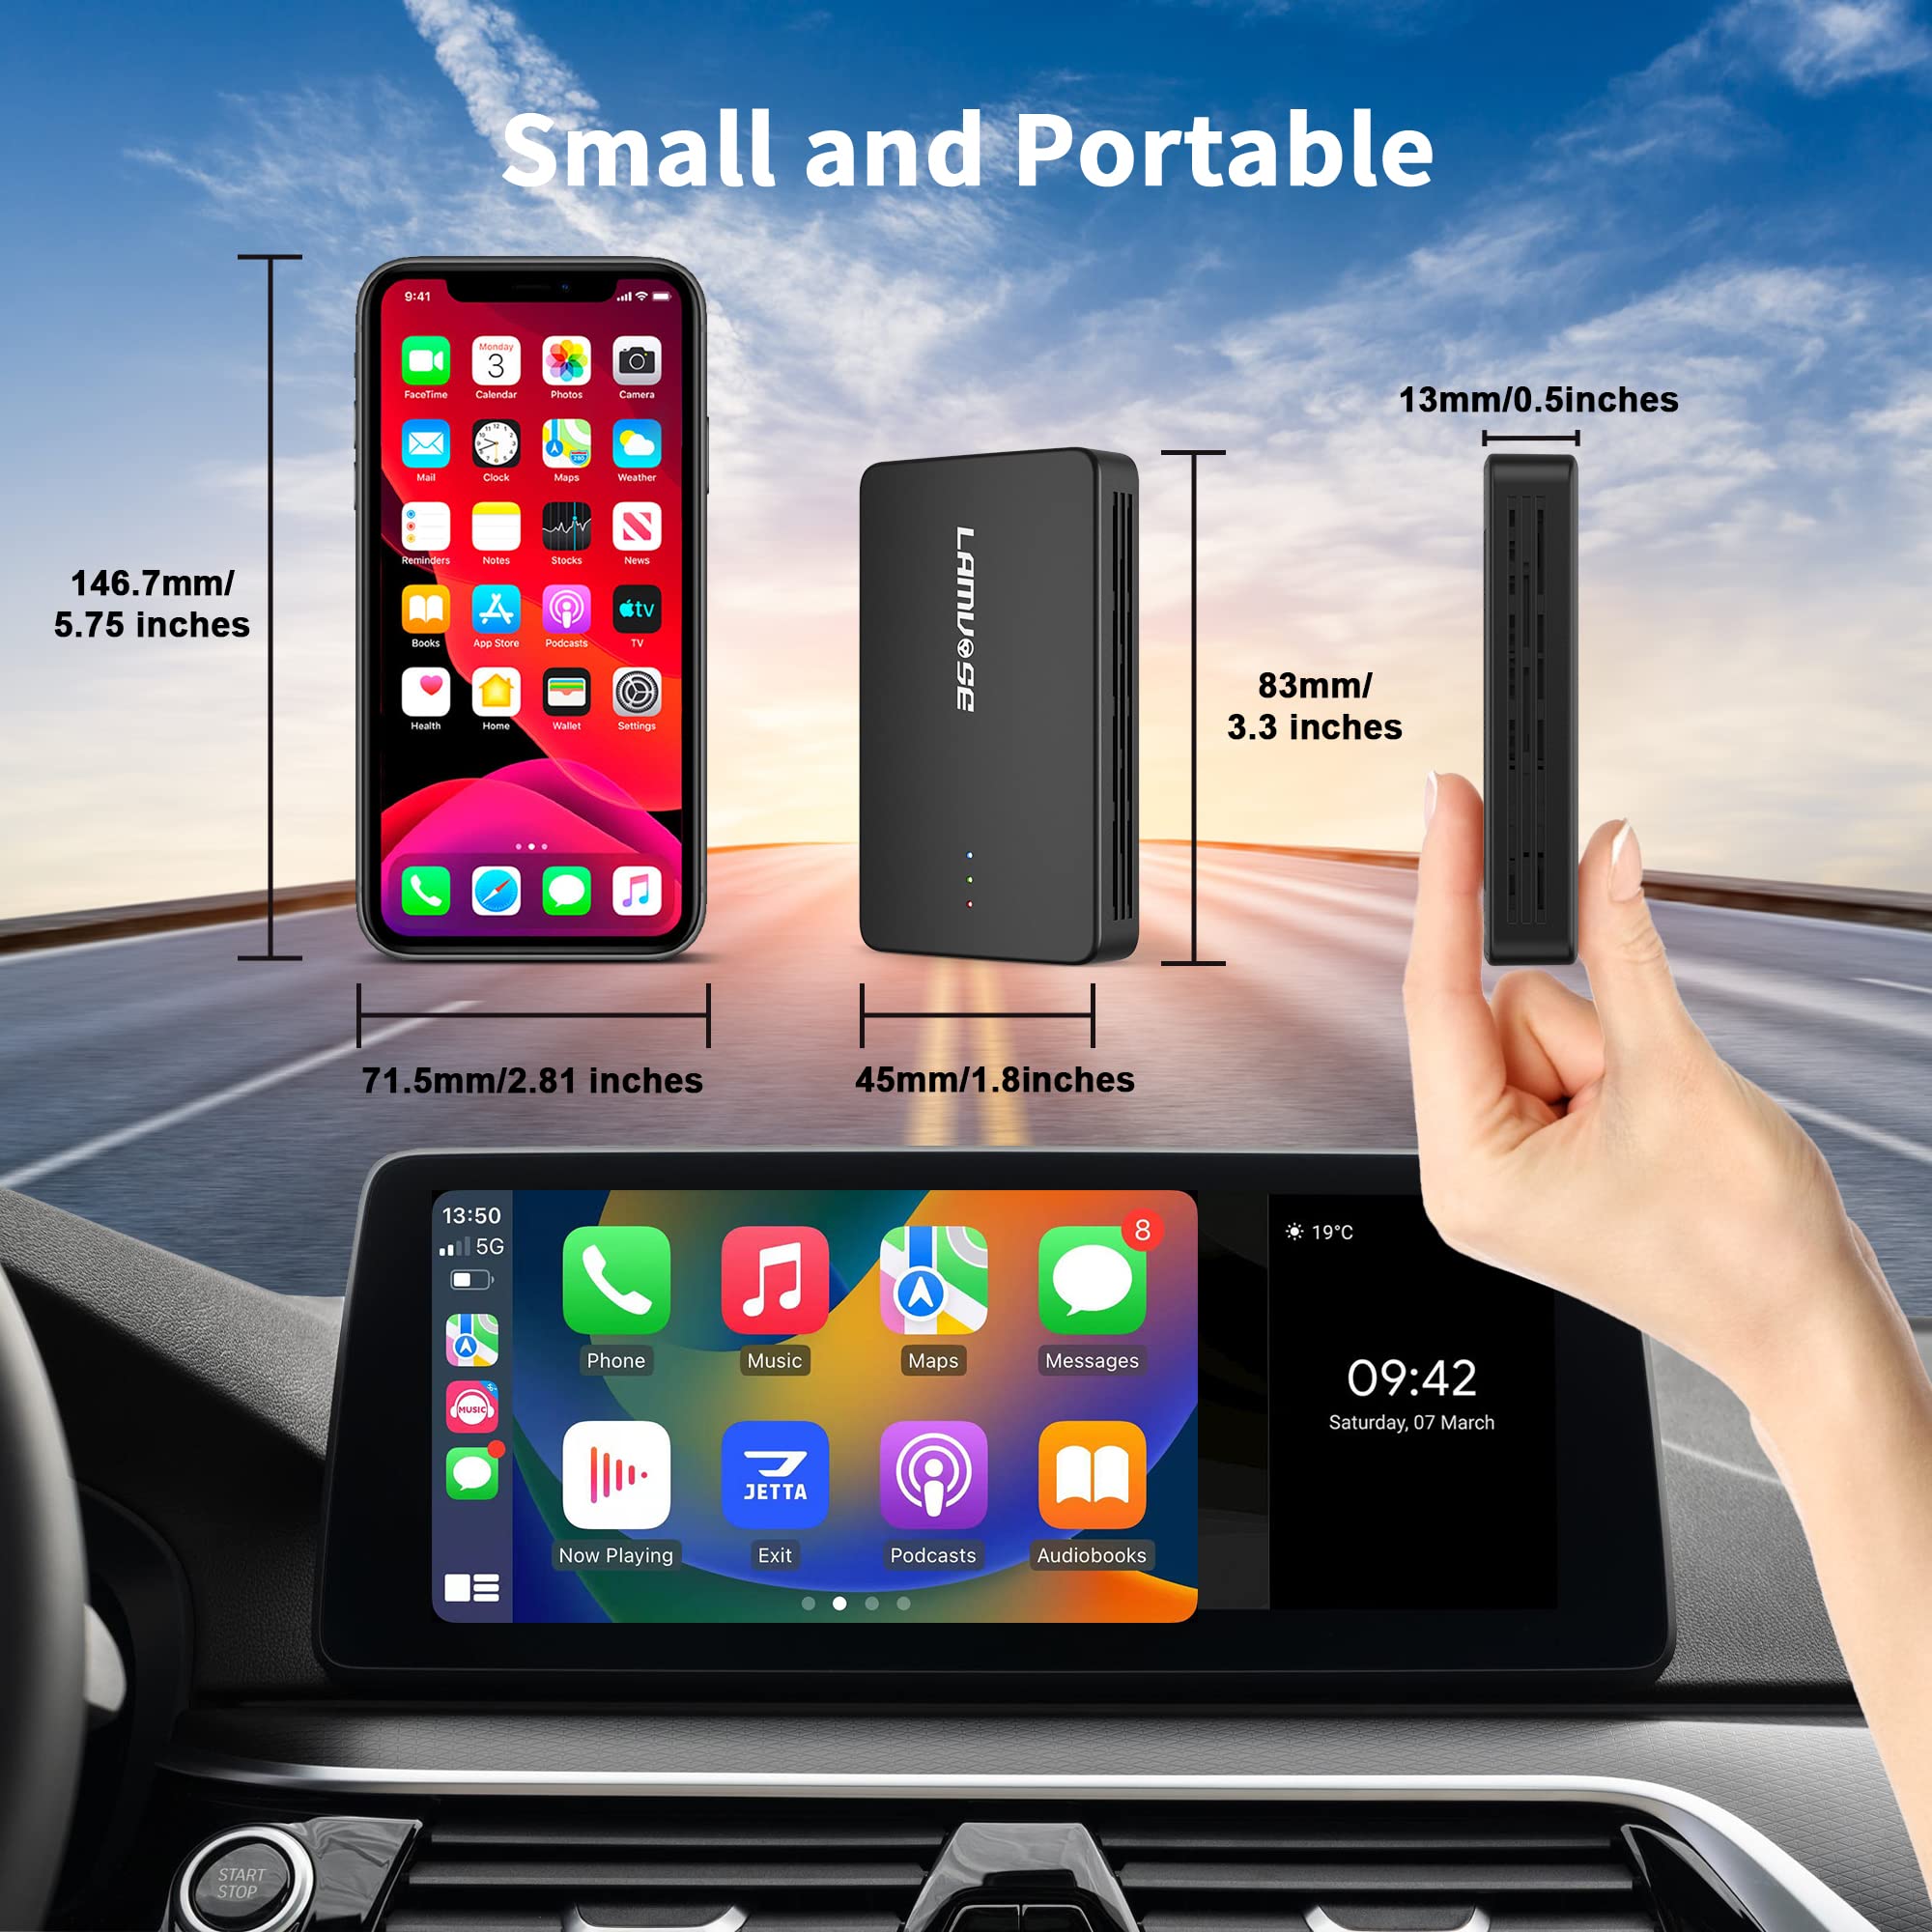 Wireless CarPlay Adapter, LAMVOSE The Magic Box Carplay Stream to Your Car for Apple CarPlay & Android Auto, Multimedia Video AI Box Convert Wired to Wireless Carplay Box, Plug & Play, Netfix, Youtube